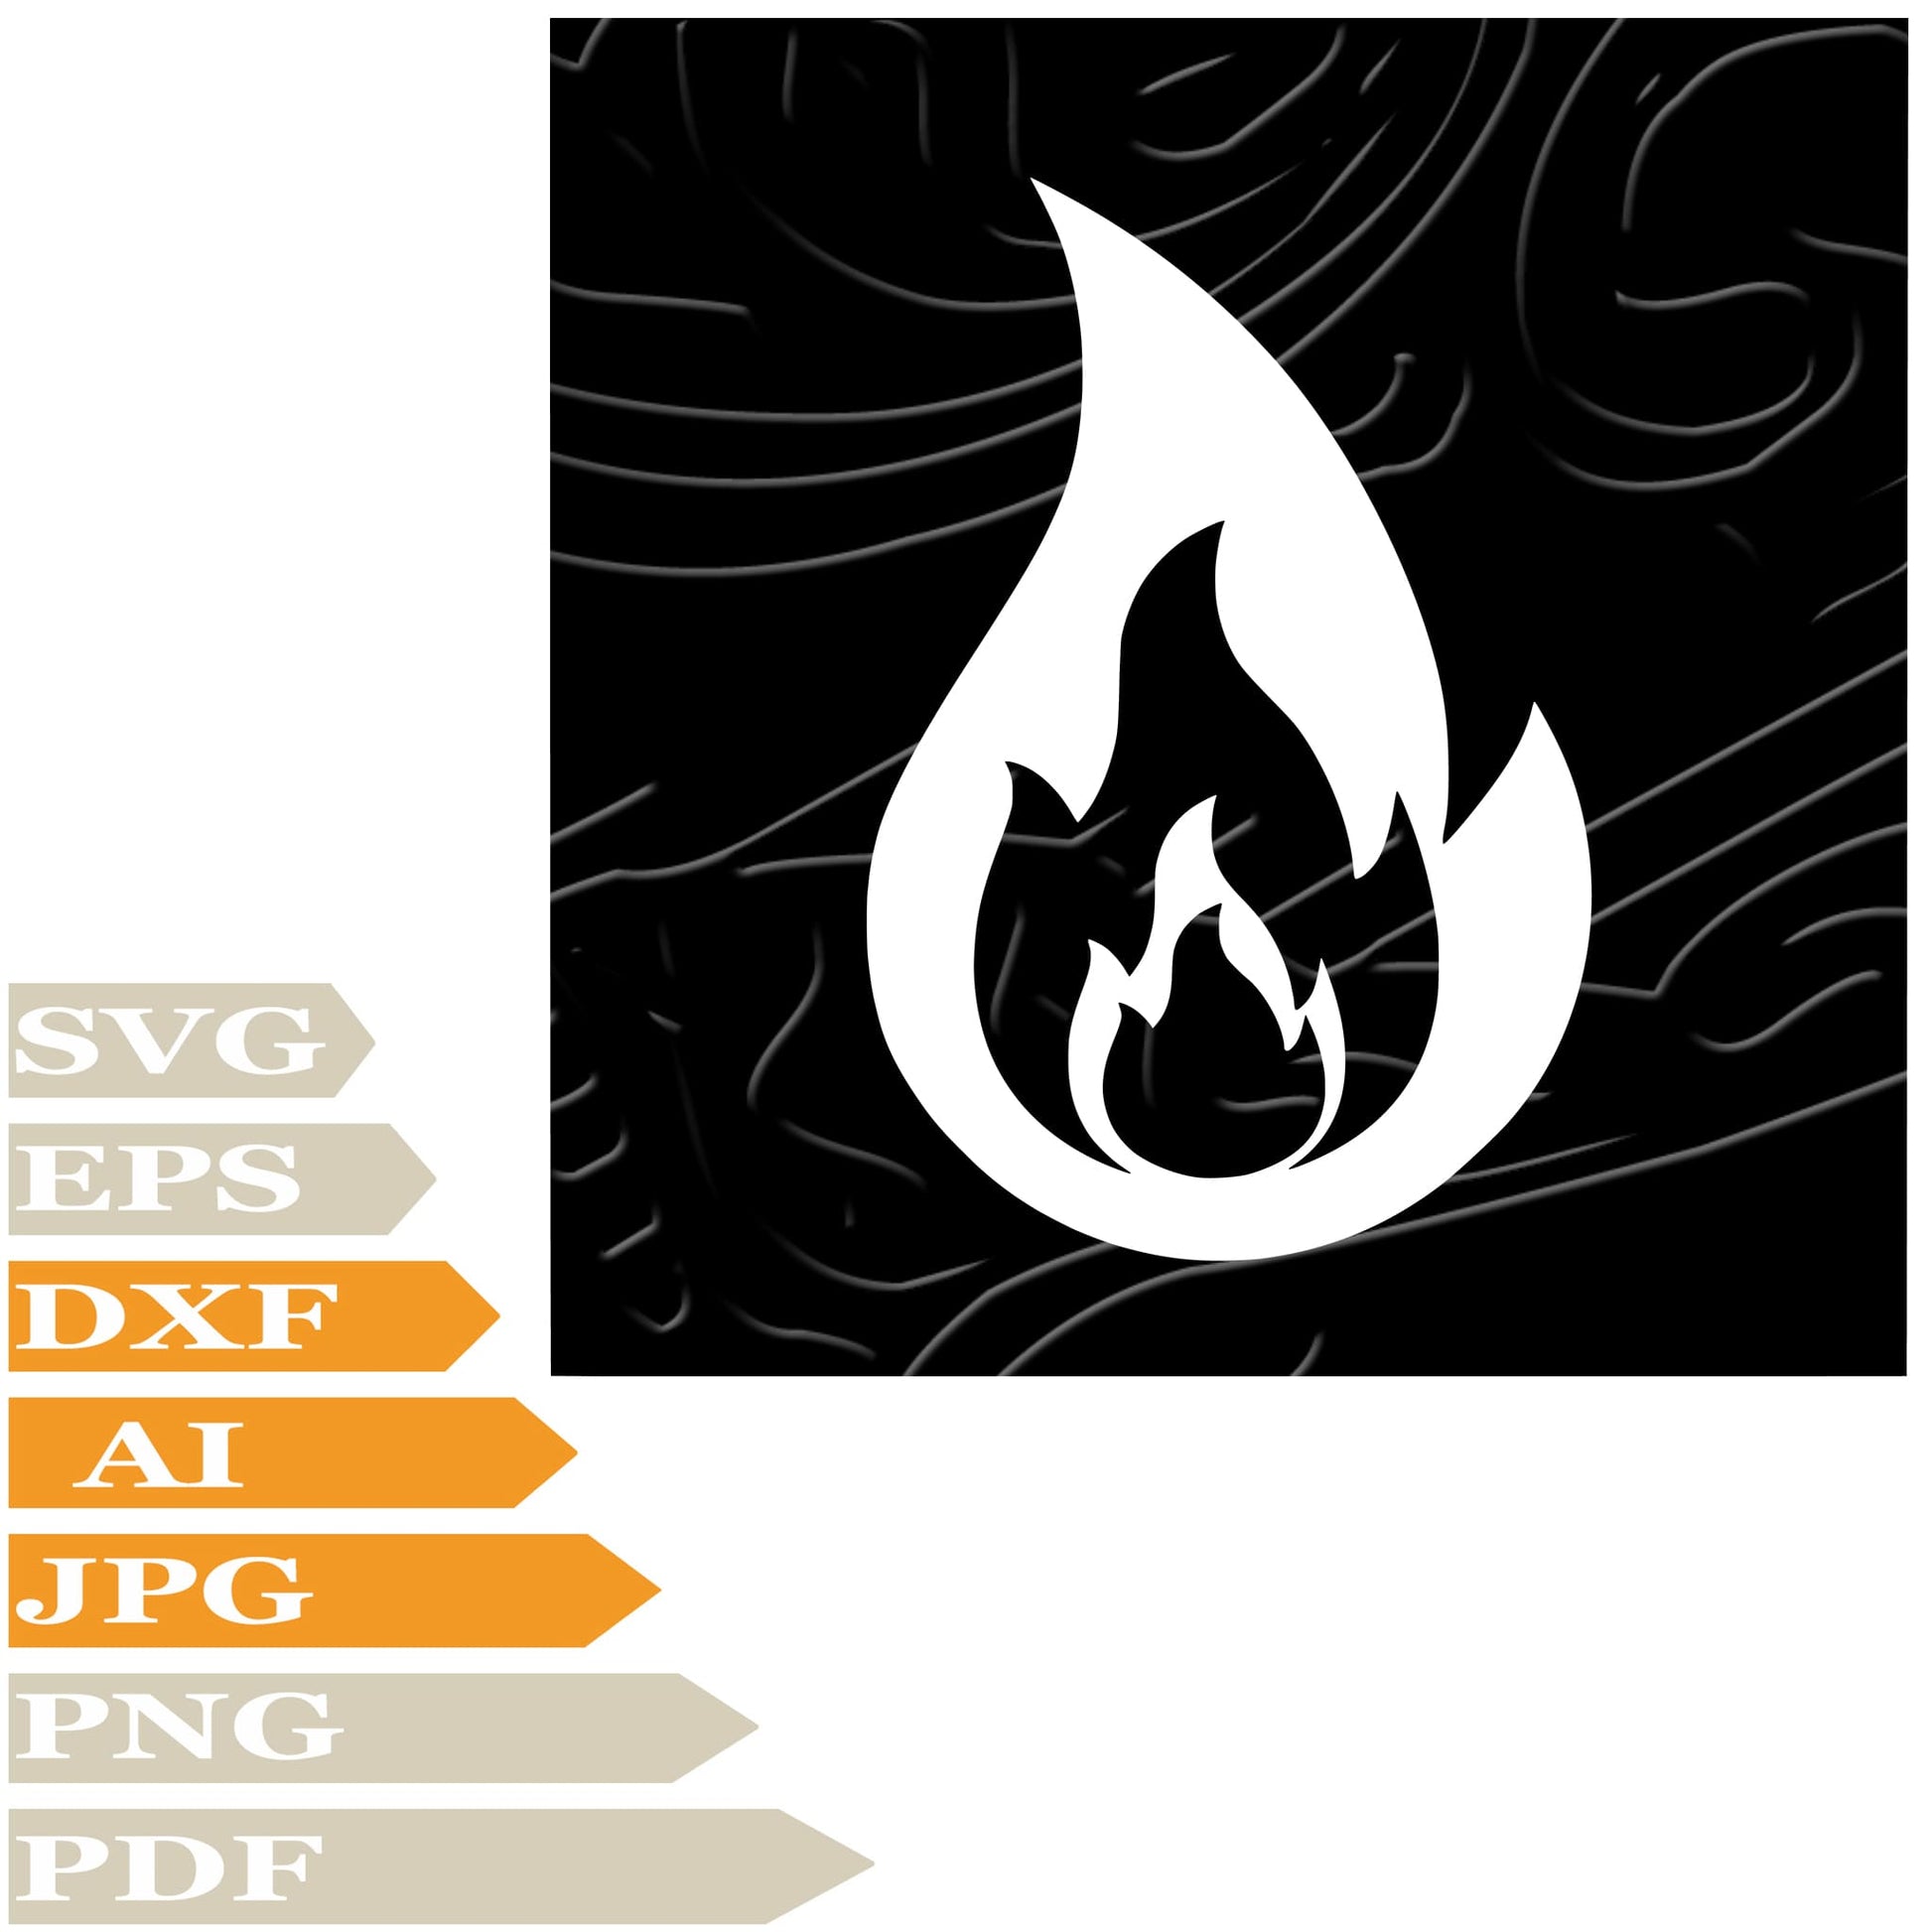 Signs SVG File - Fire Signs Vector Graphics - Fire Cylinder SVG Design - Fire Hatchet PNG-Cricut-Cut File-Clipart-For Tattoo-Print-Decal-Shirt-Silhouette